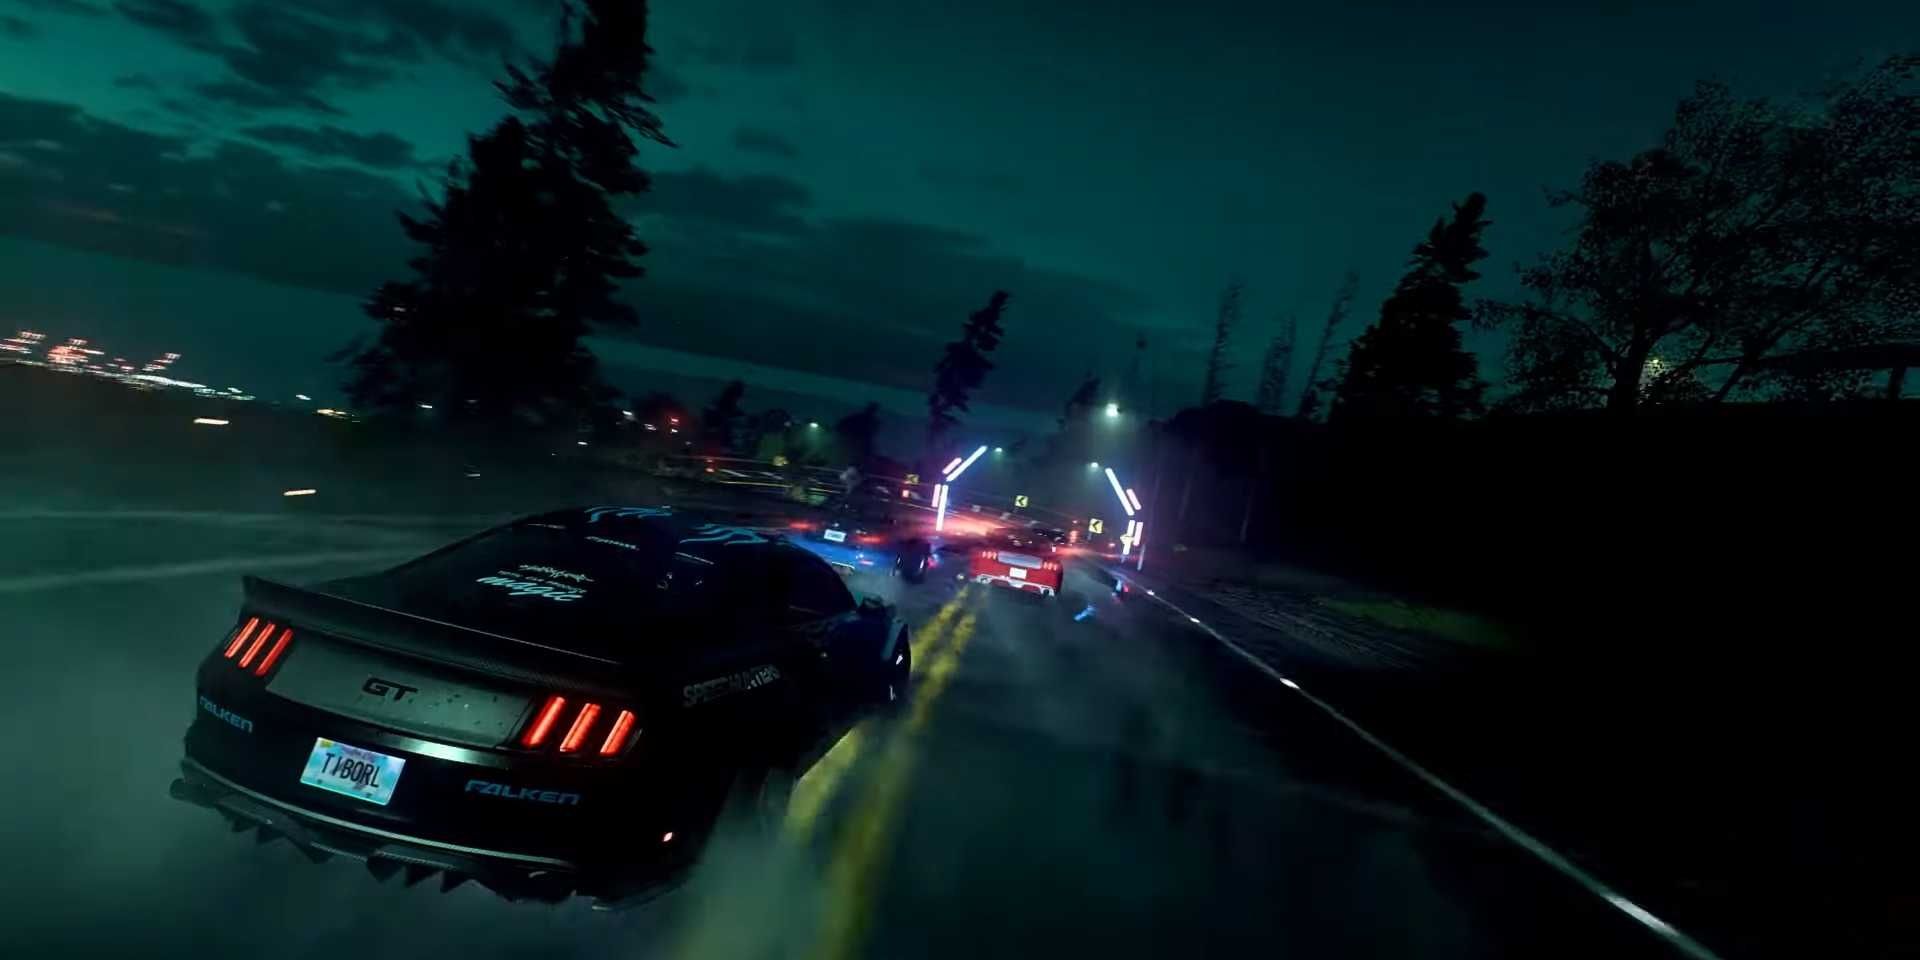 need for speed heat mustang racing at night with other car on the road 